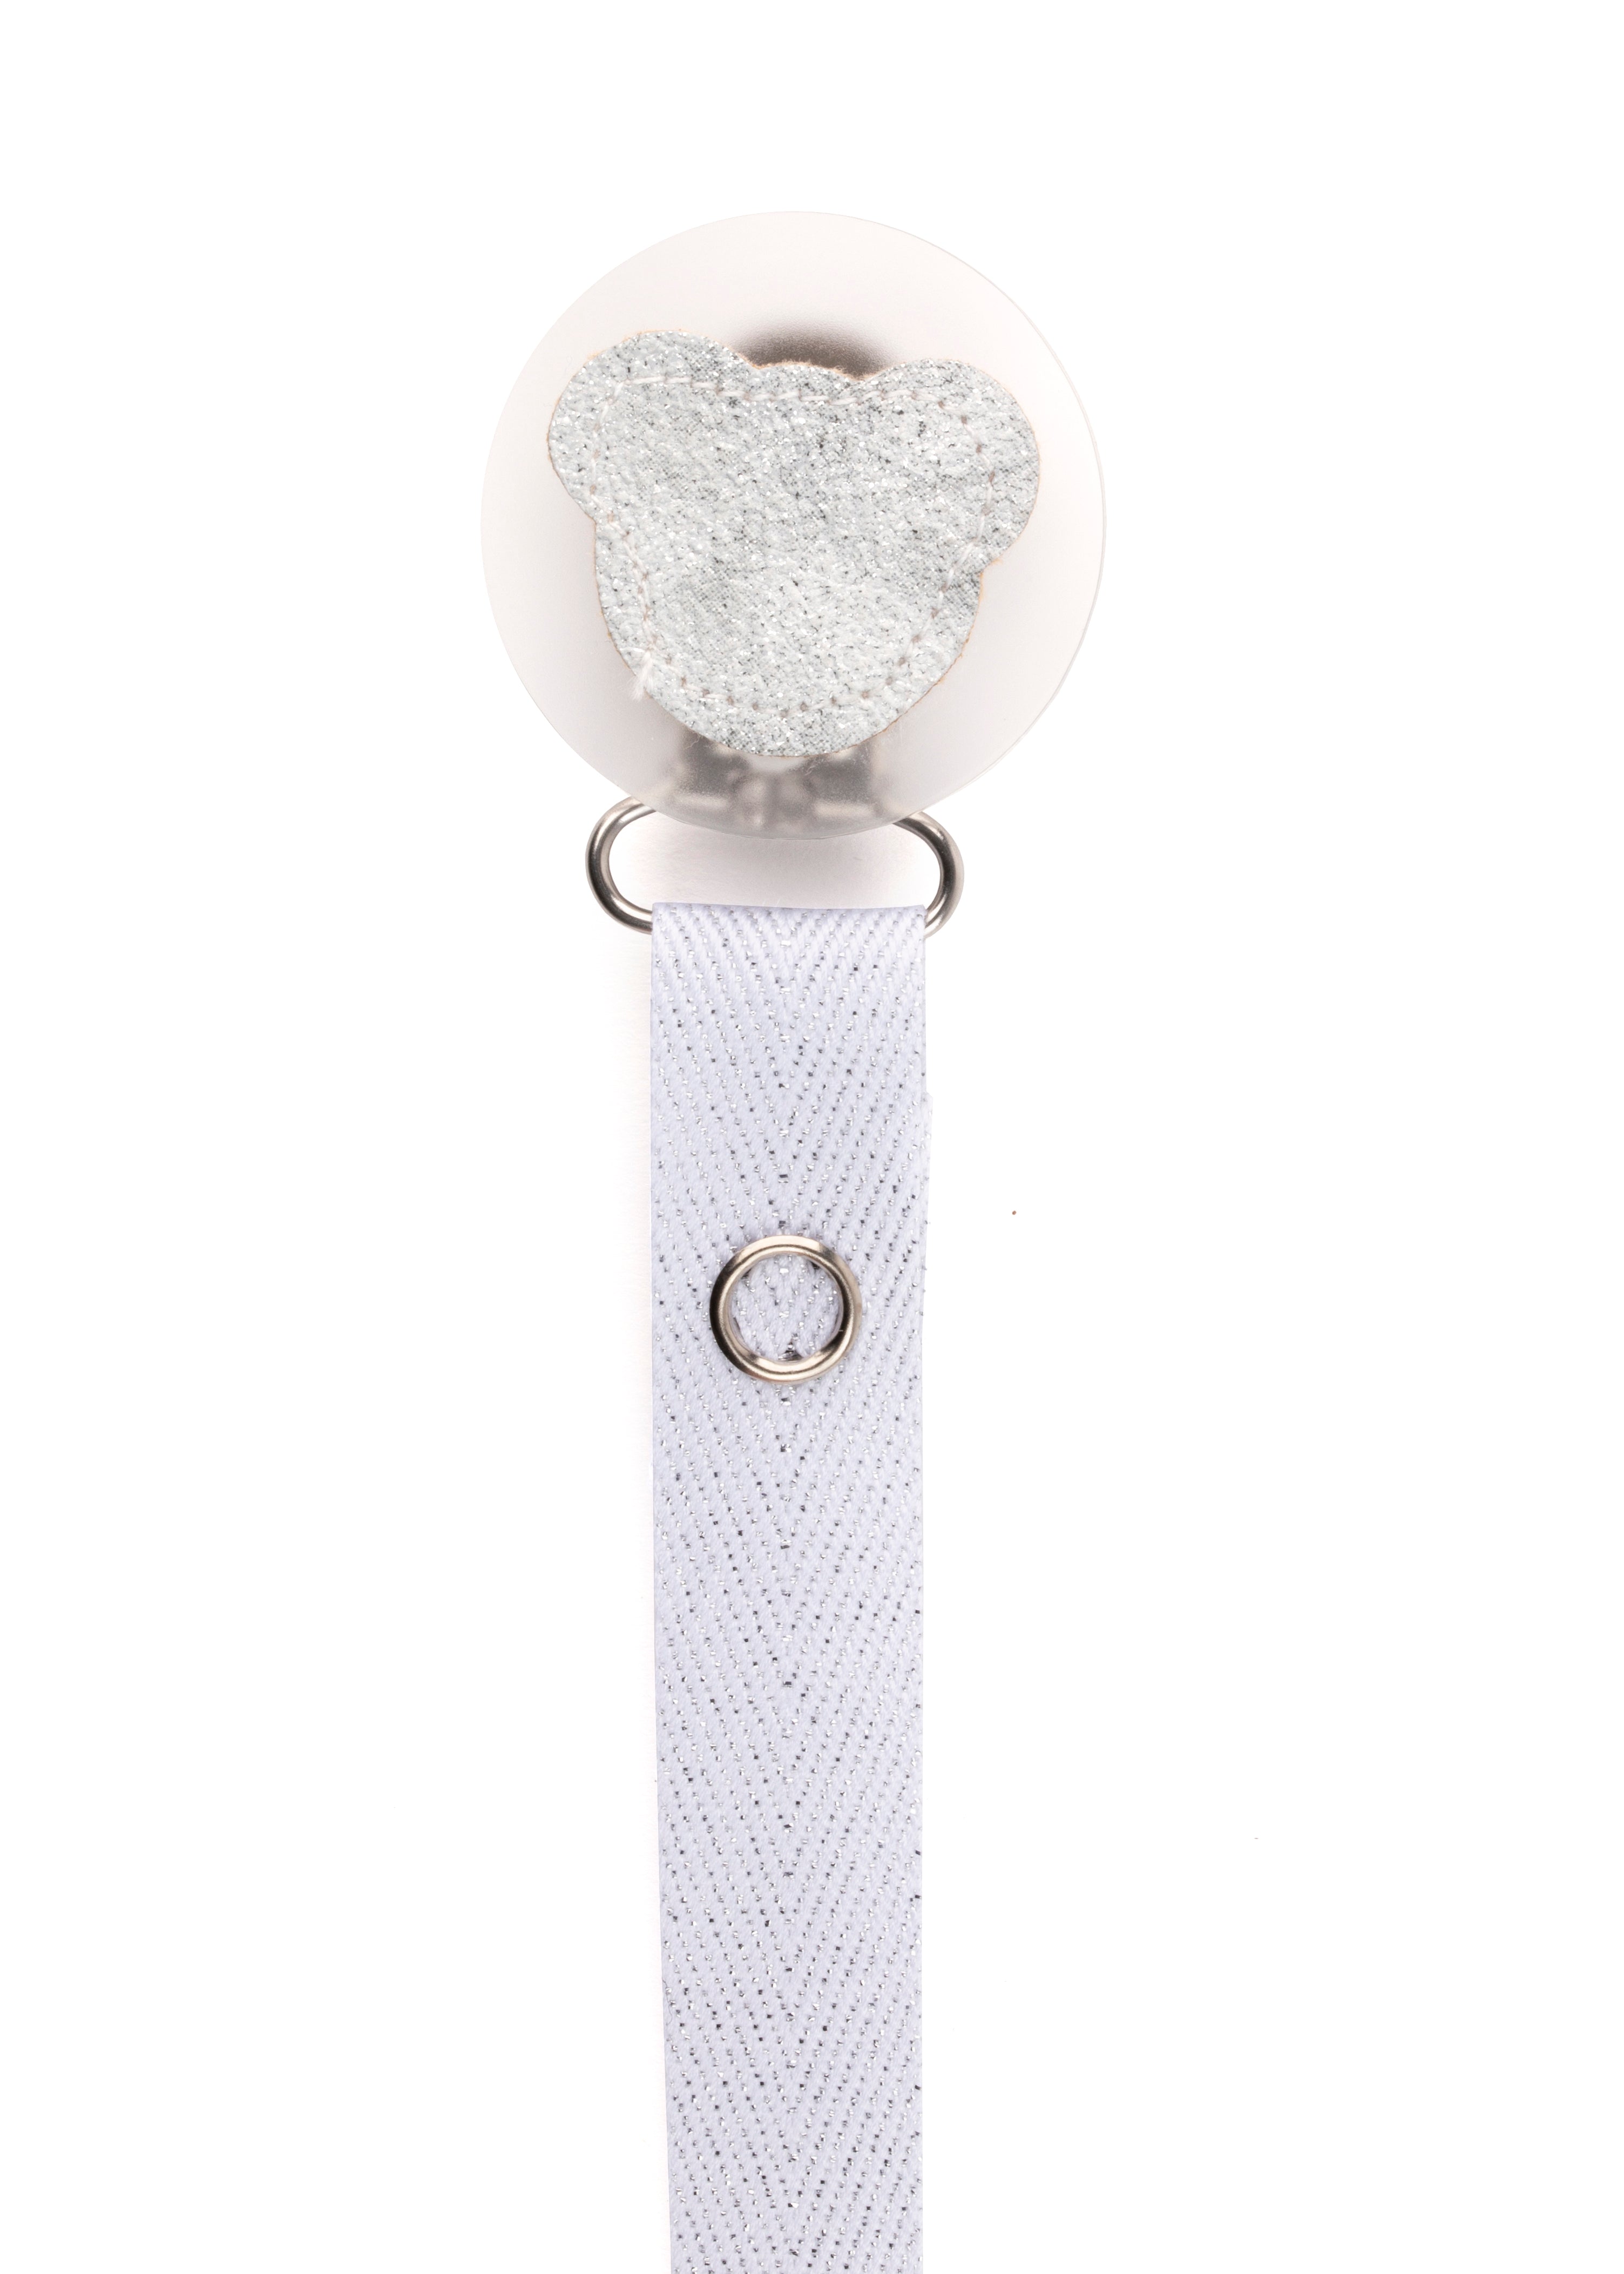 Classy Paci sparkle WHITE leather Teddy, Silver, Grey, girl boy baby pacifier clip